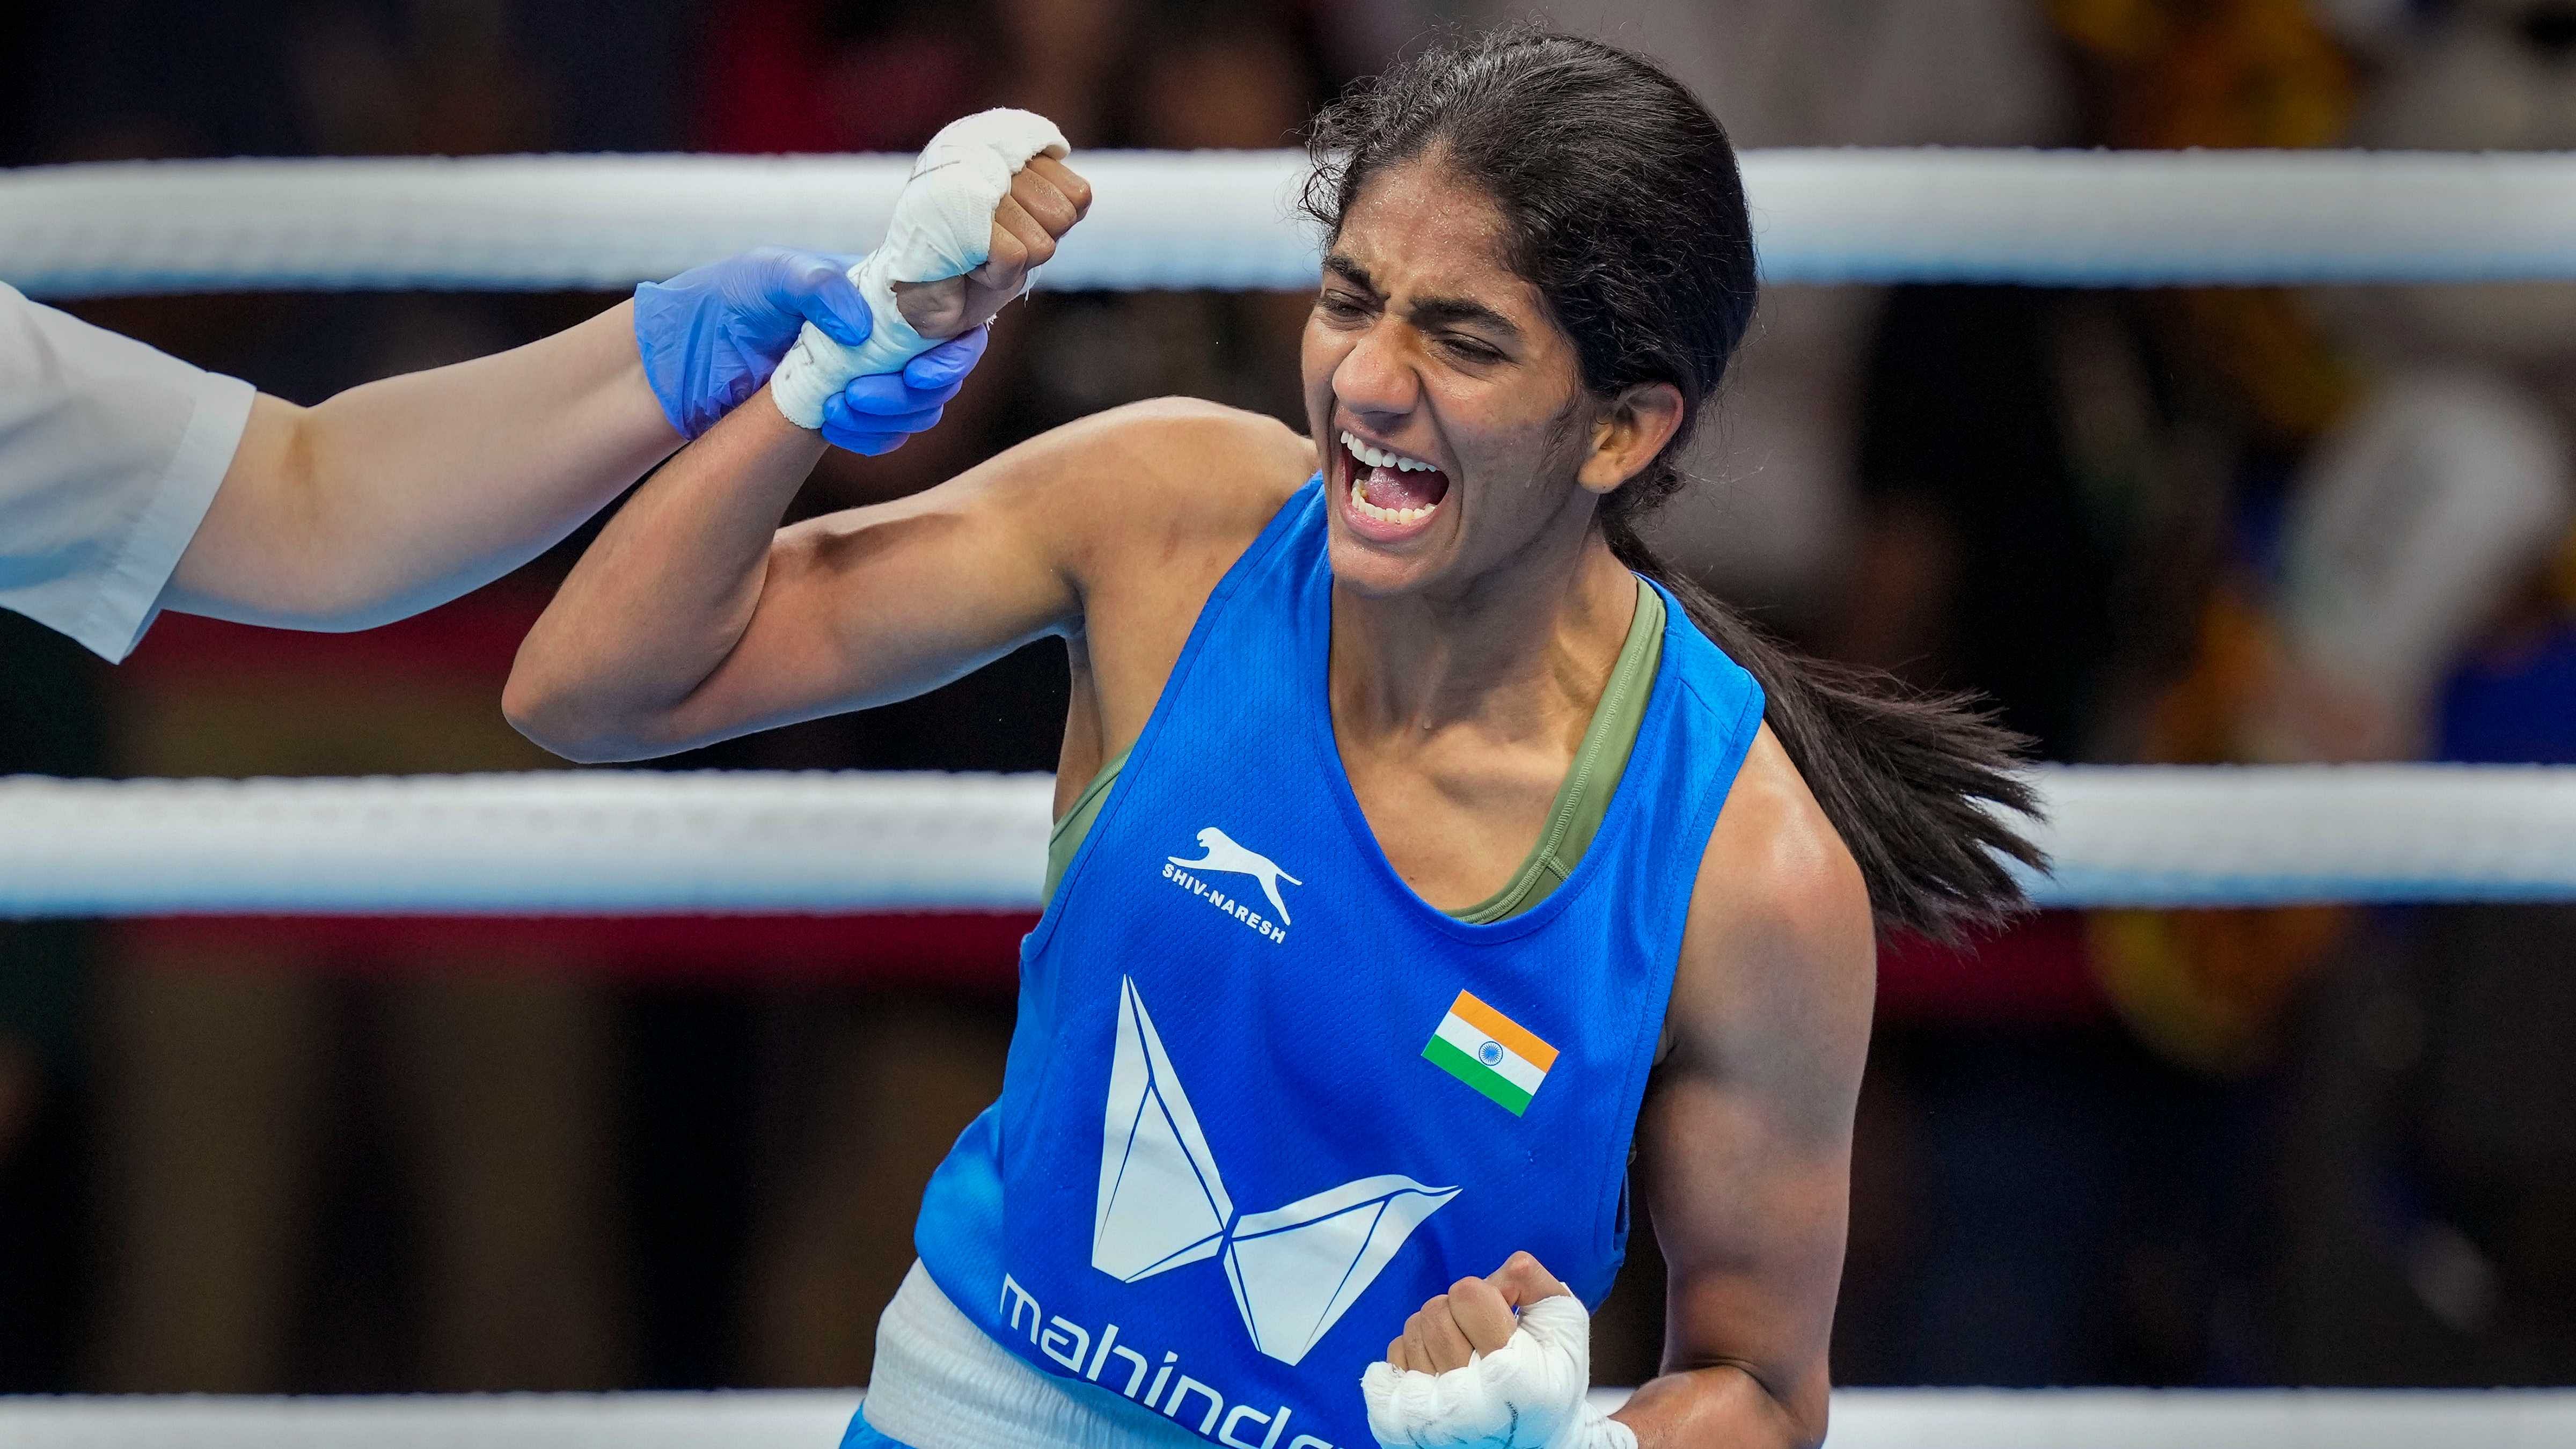 Nitu reacts after winning her 45-48kg category semifinals match against Kazakhstan's Alua Balkibekova at the 2023 IBA Women's Boxing World Championships. Credit: PTI Photo